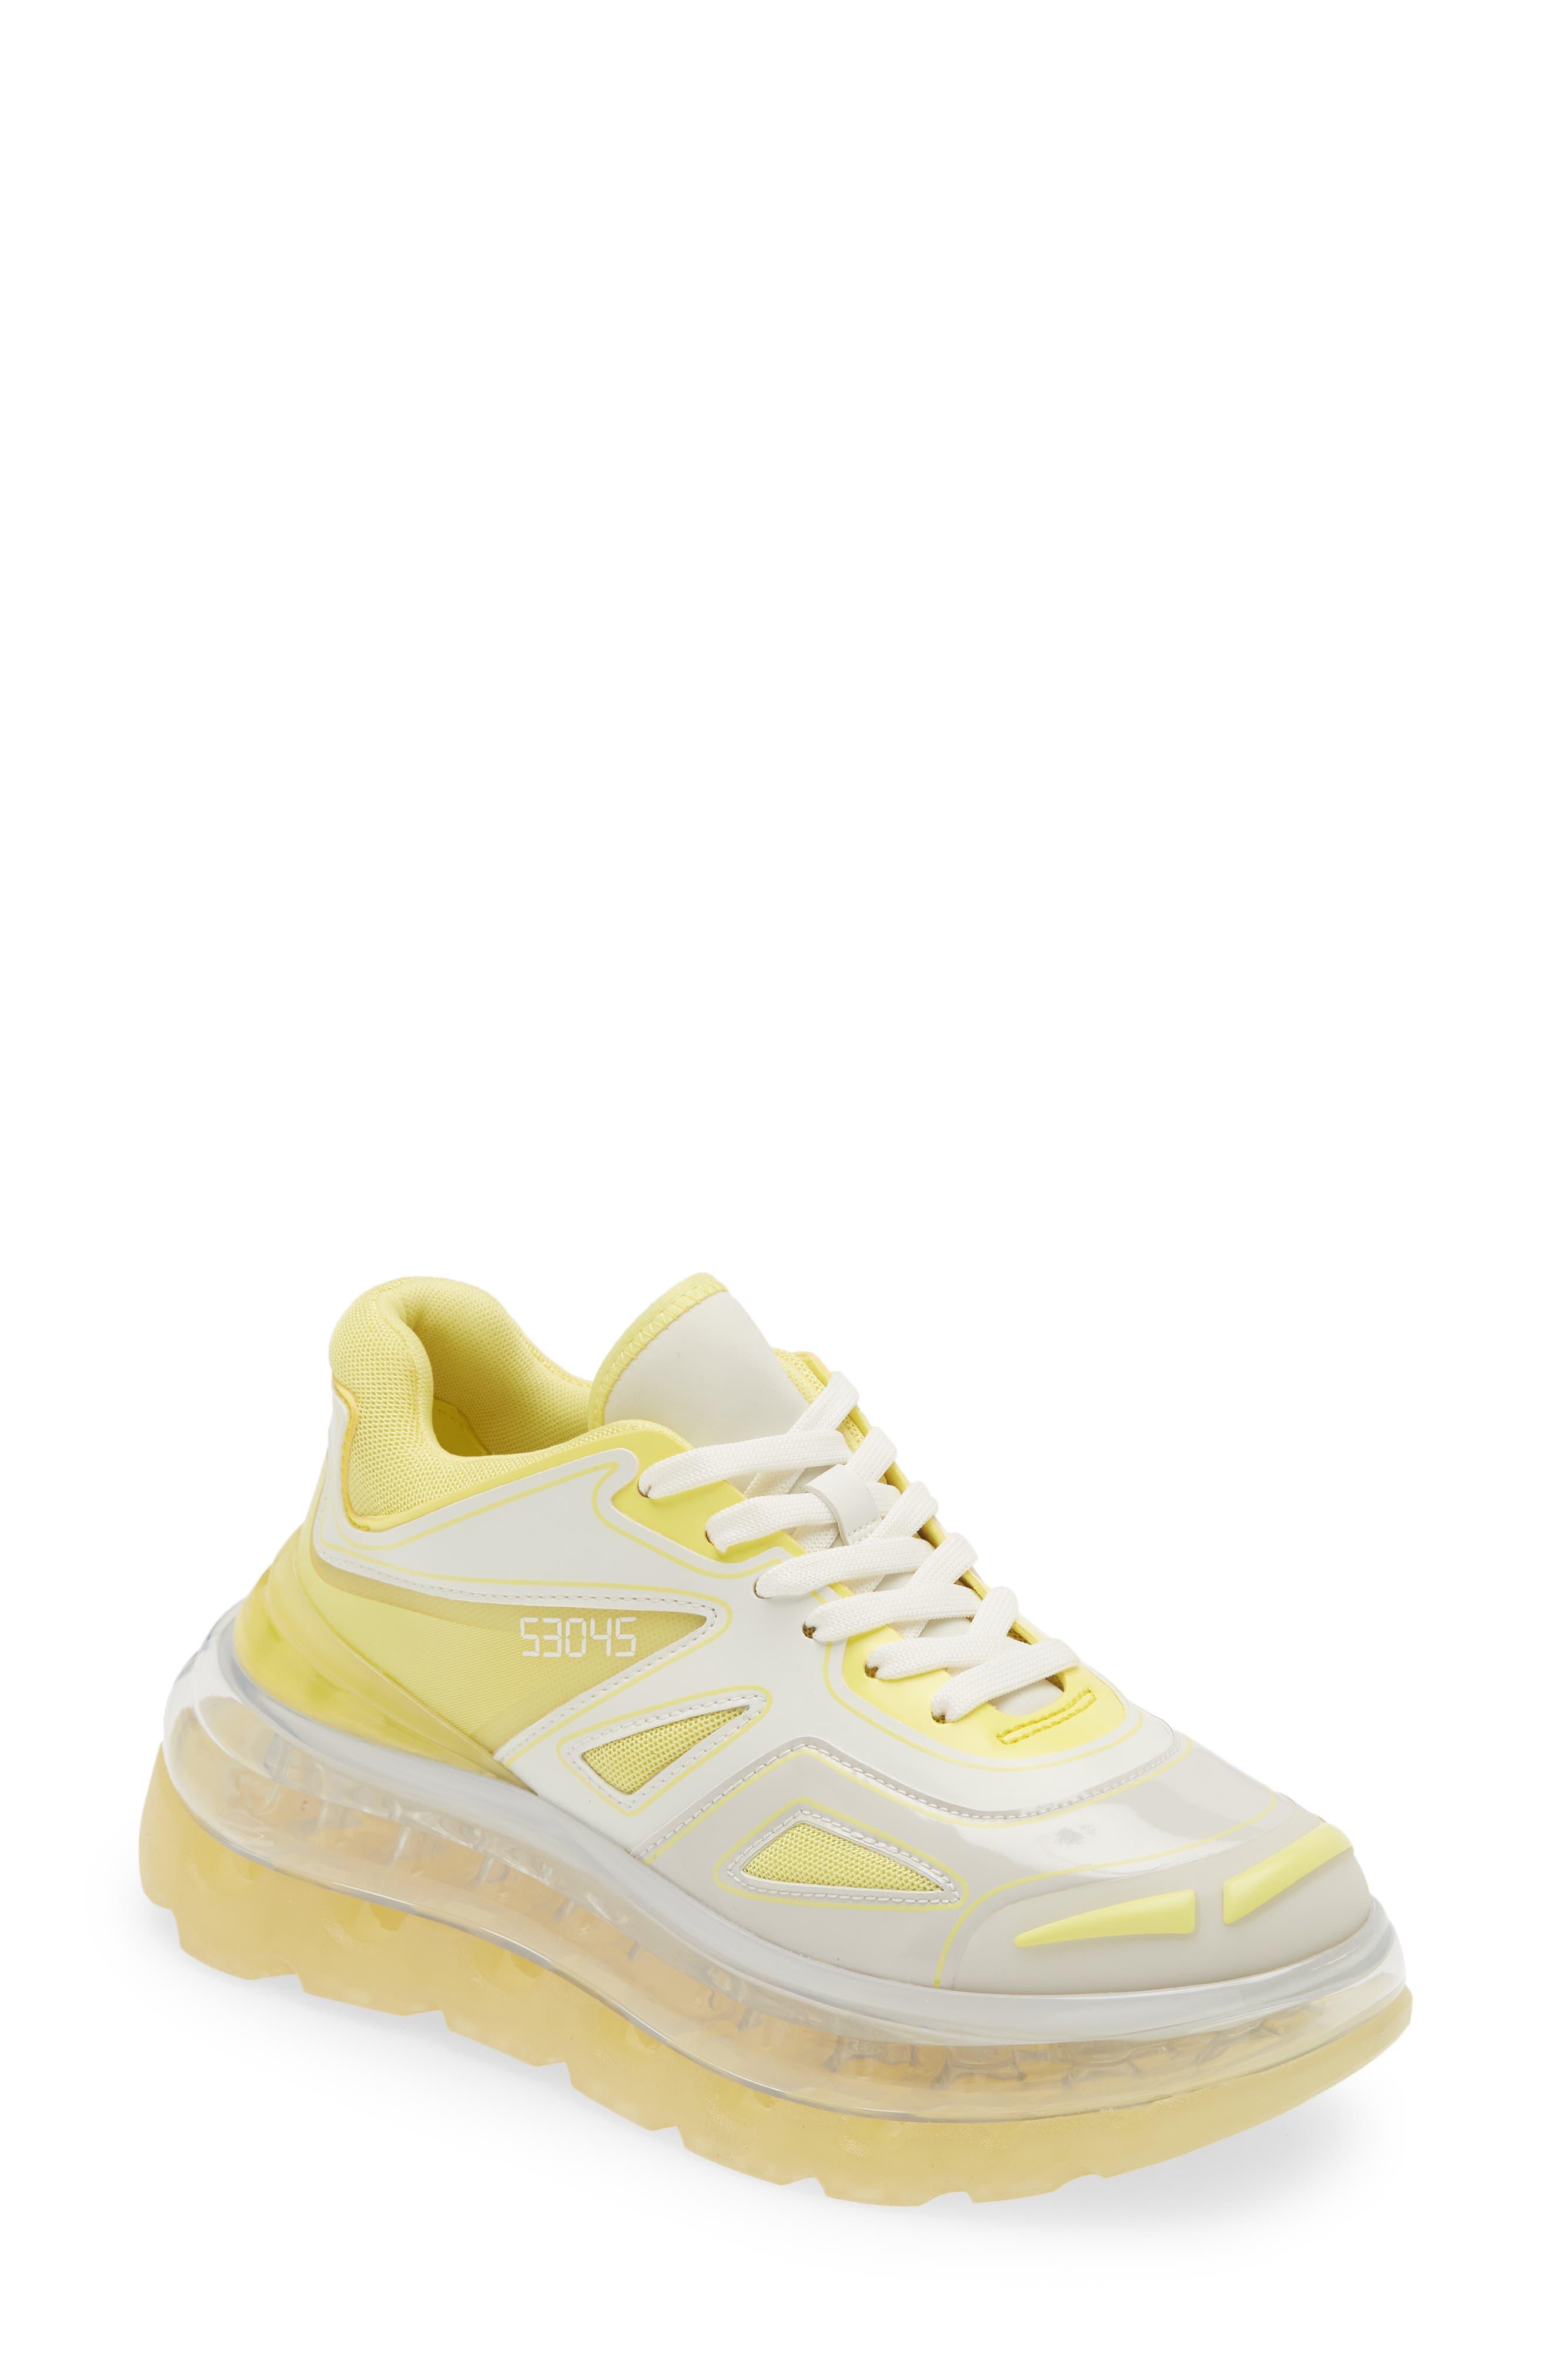 Shoes 53045 Bump'air Platform Sneaker in Yellow | Lyst